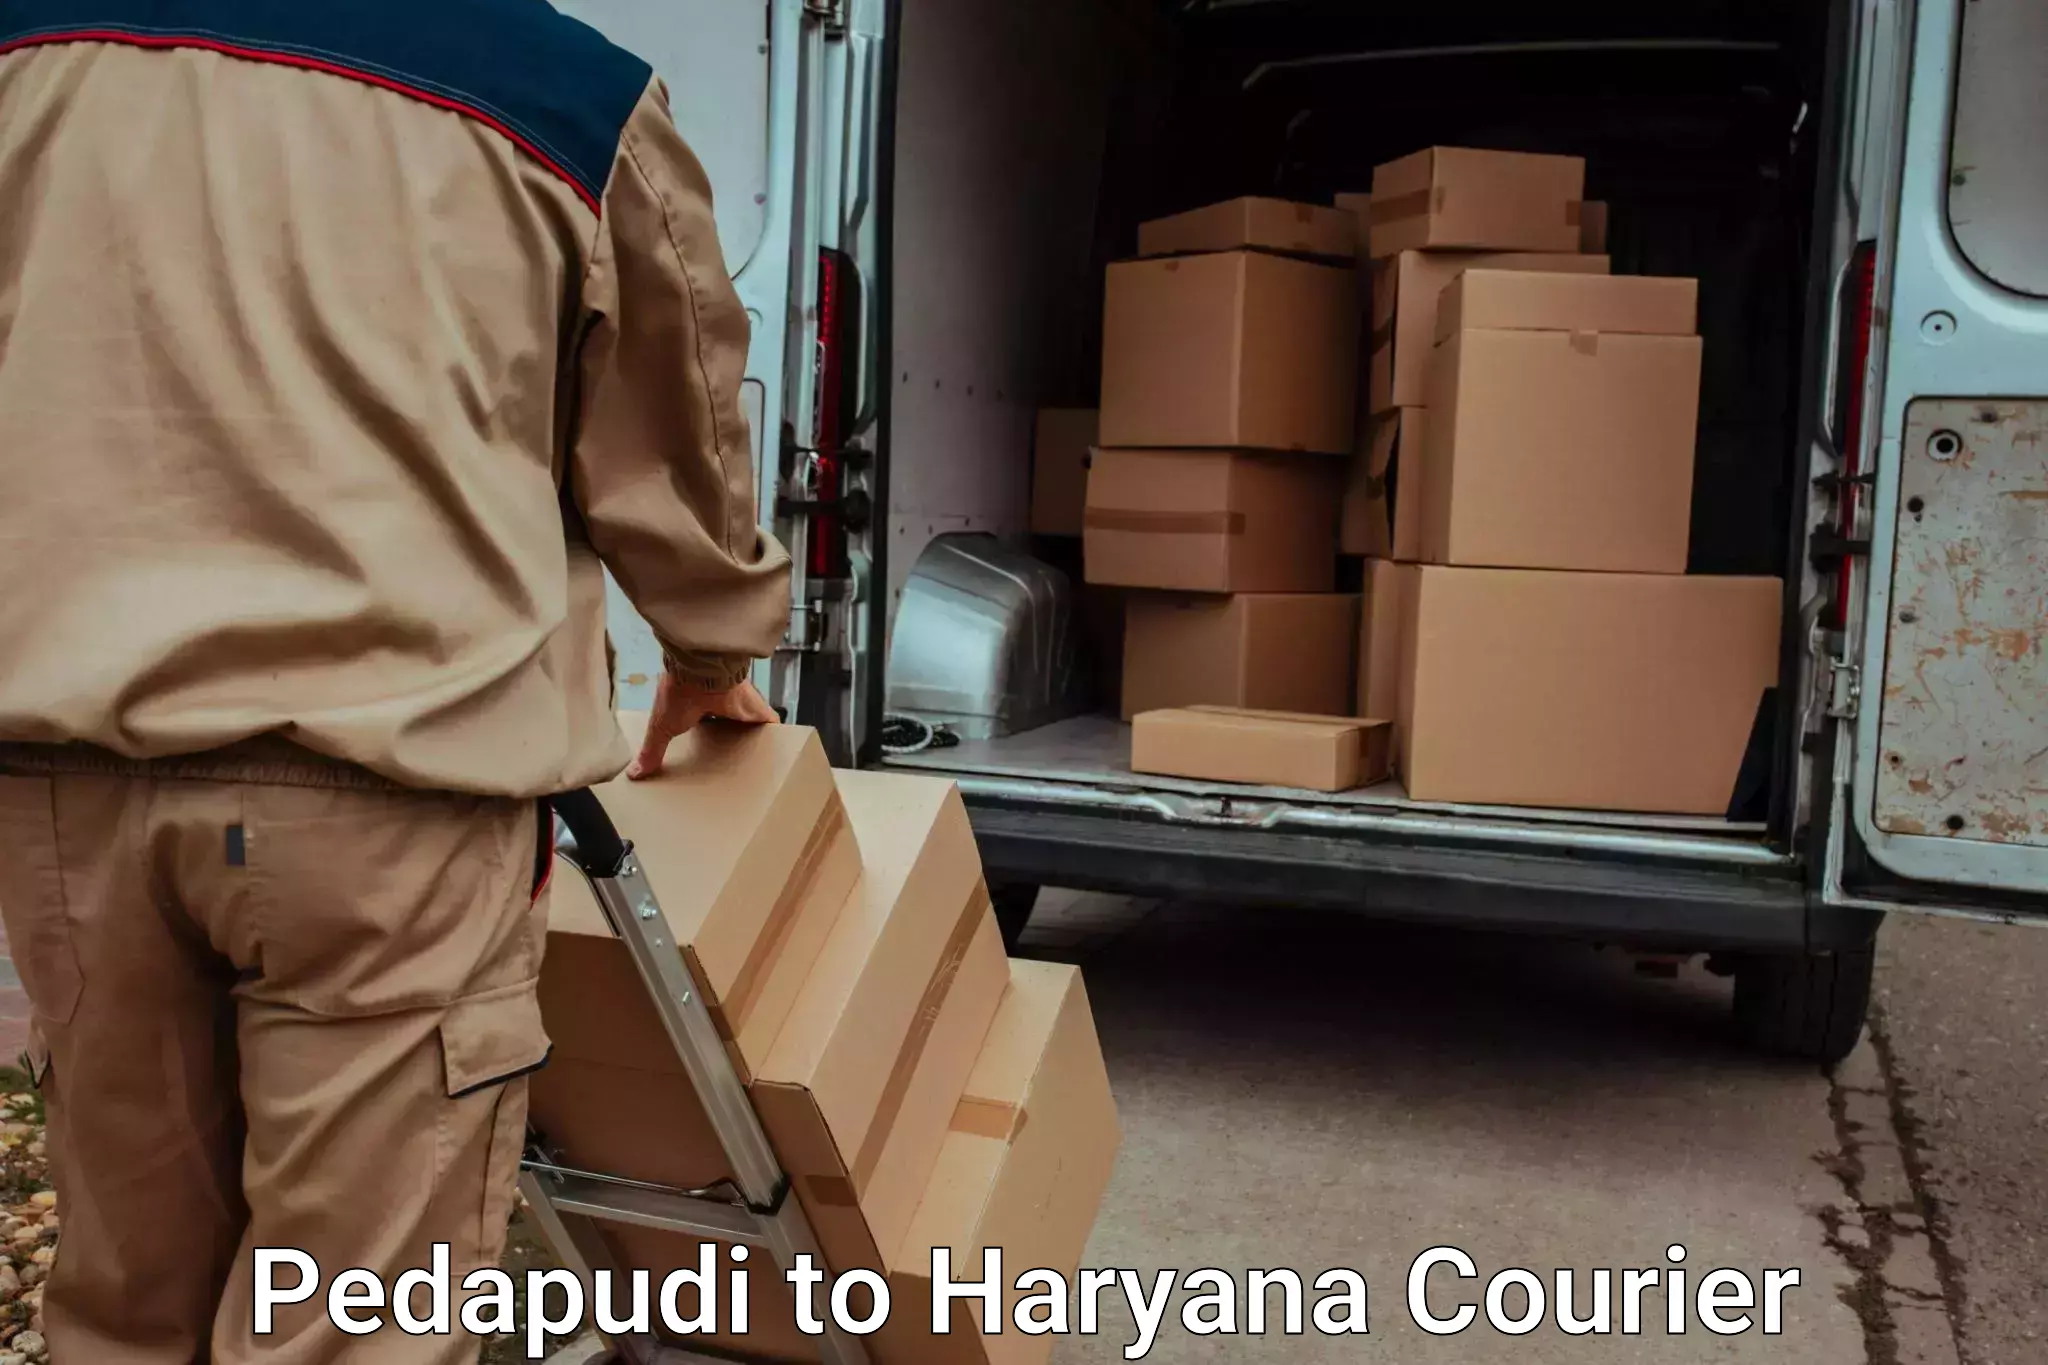 Trusted relocation experts Pedapudi to Gurgaon